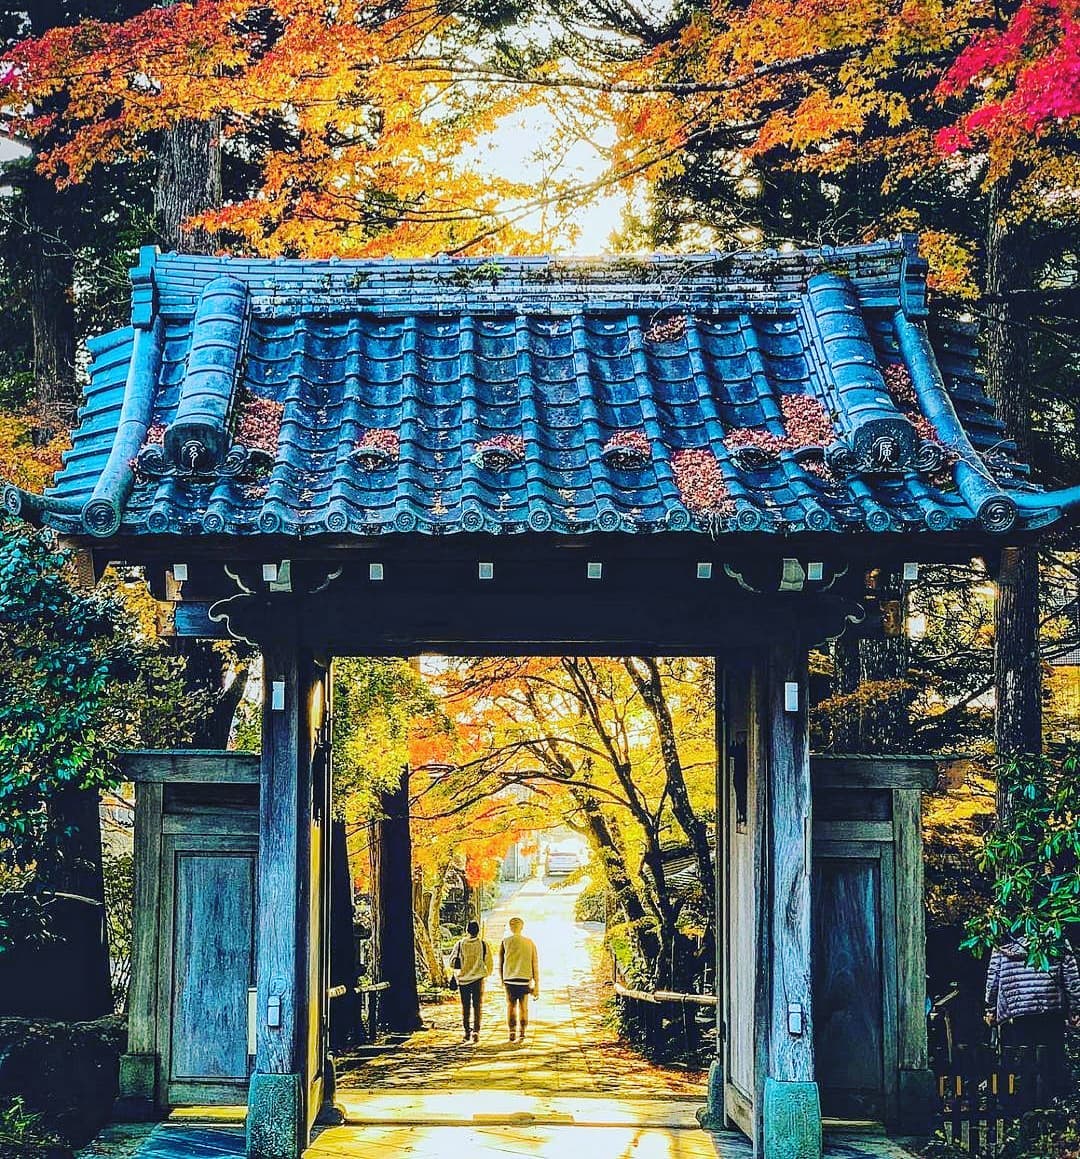 .
Autumn in Japan.
What a glorious time to be there! 
.
And November 2022 will see us there too. 
And.We.Cannot.Wait...🍁🍂🍁🍂🍁🍂
.
Tour details released soon!
.
#autumninjapan #boutiquetraveljapan #japan2022 #lovejapan #womenonlytravel #womenonlytraveljapan #forwomenbywomen #womenwholovetotravel #autumnleaves